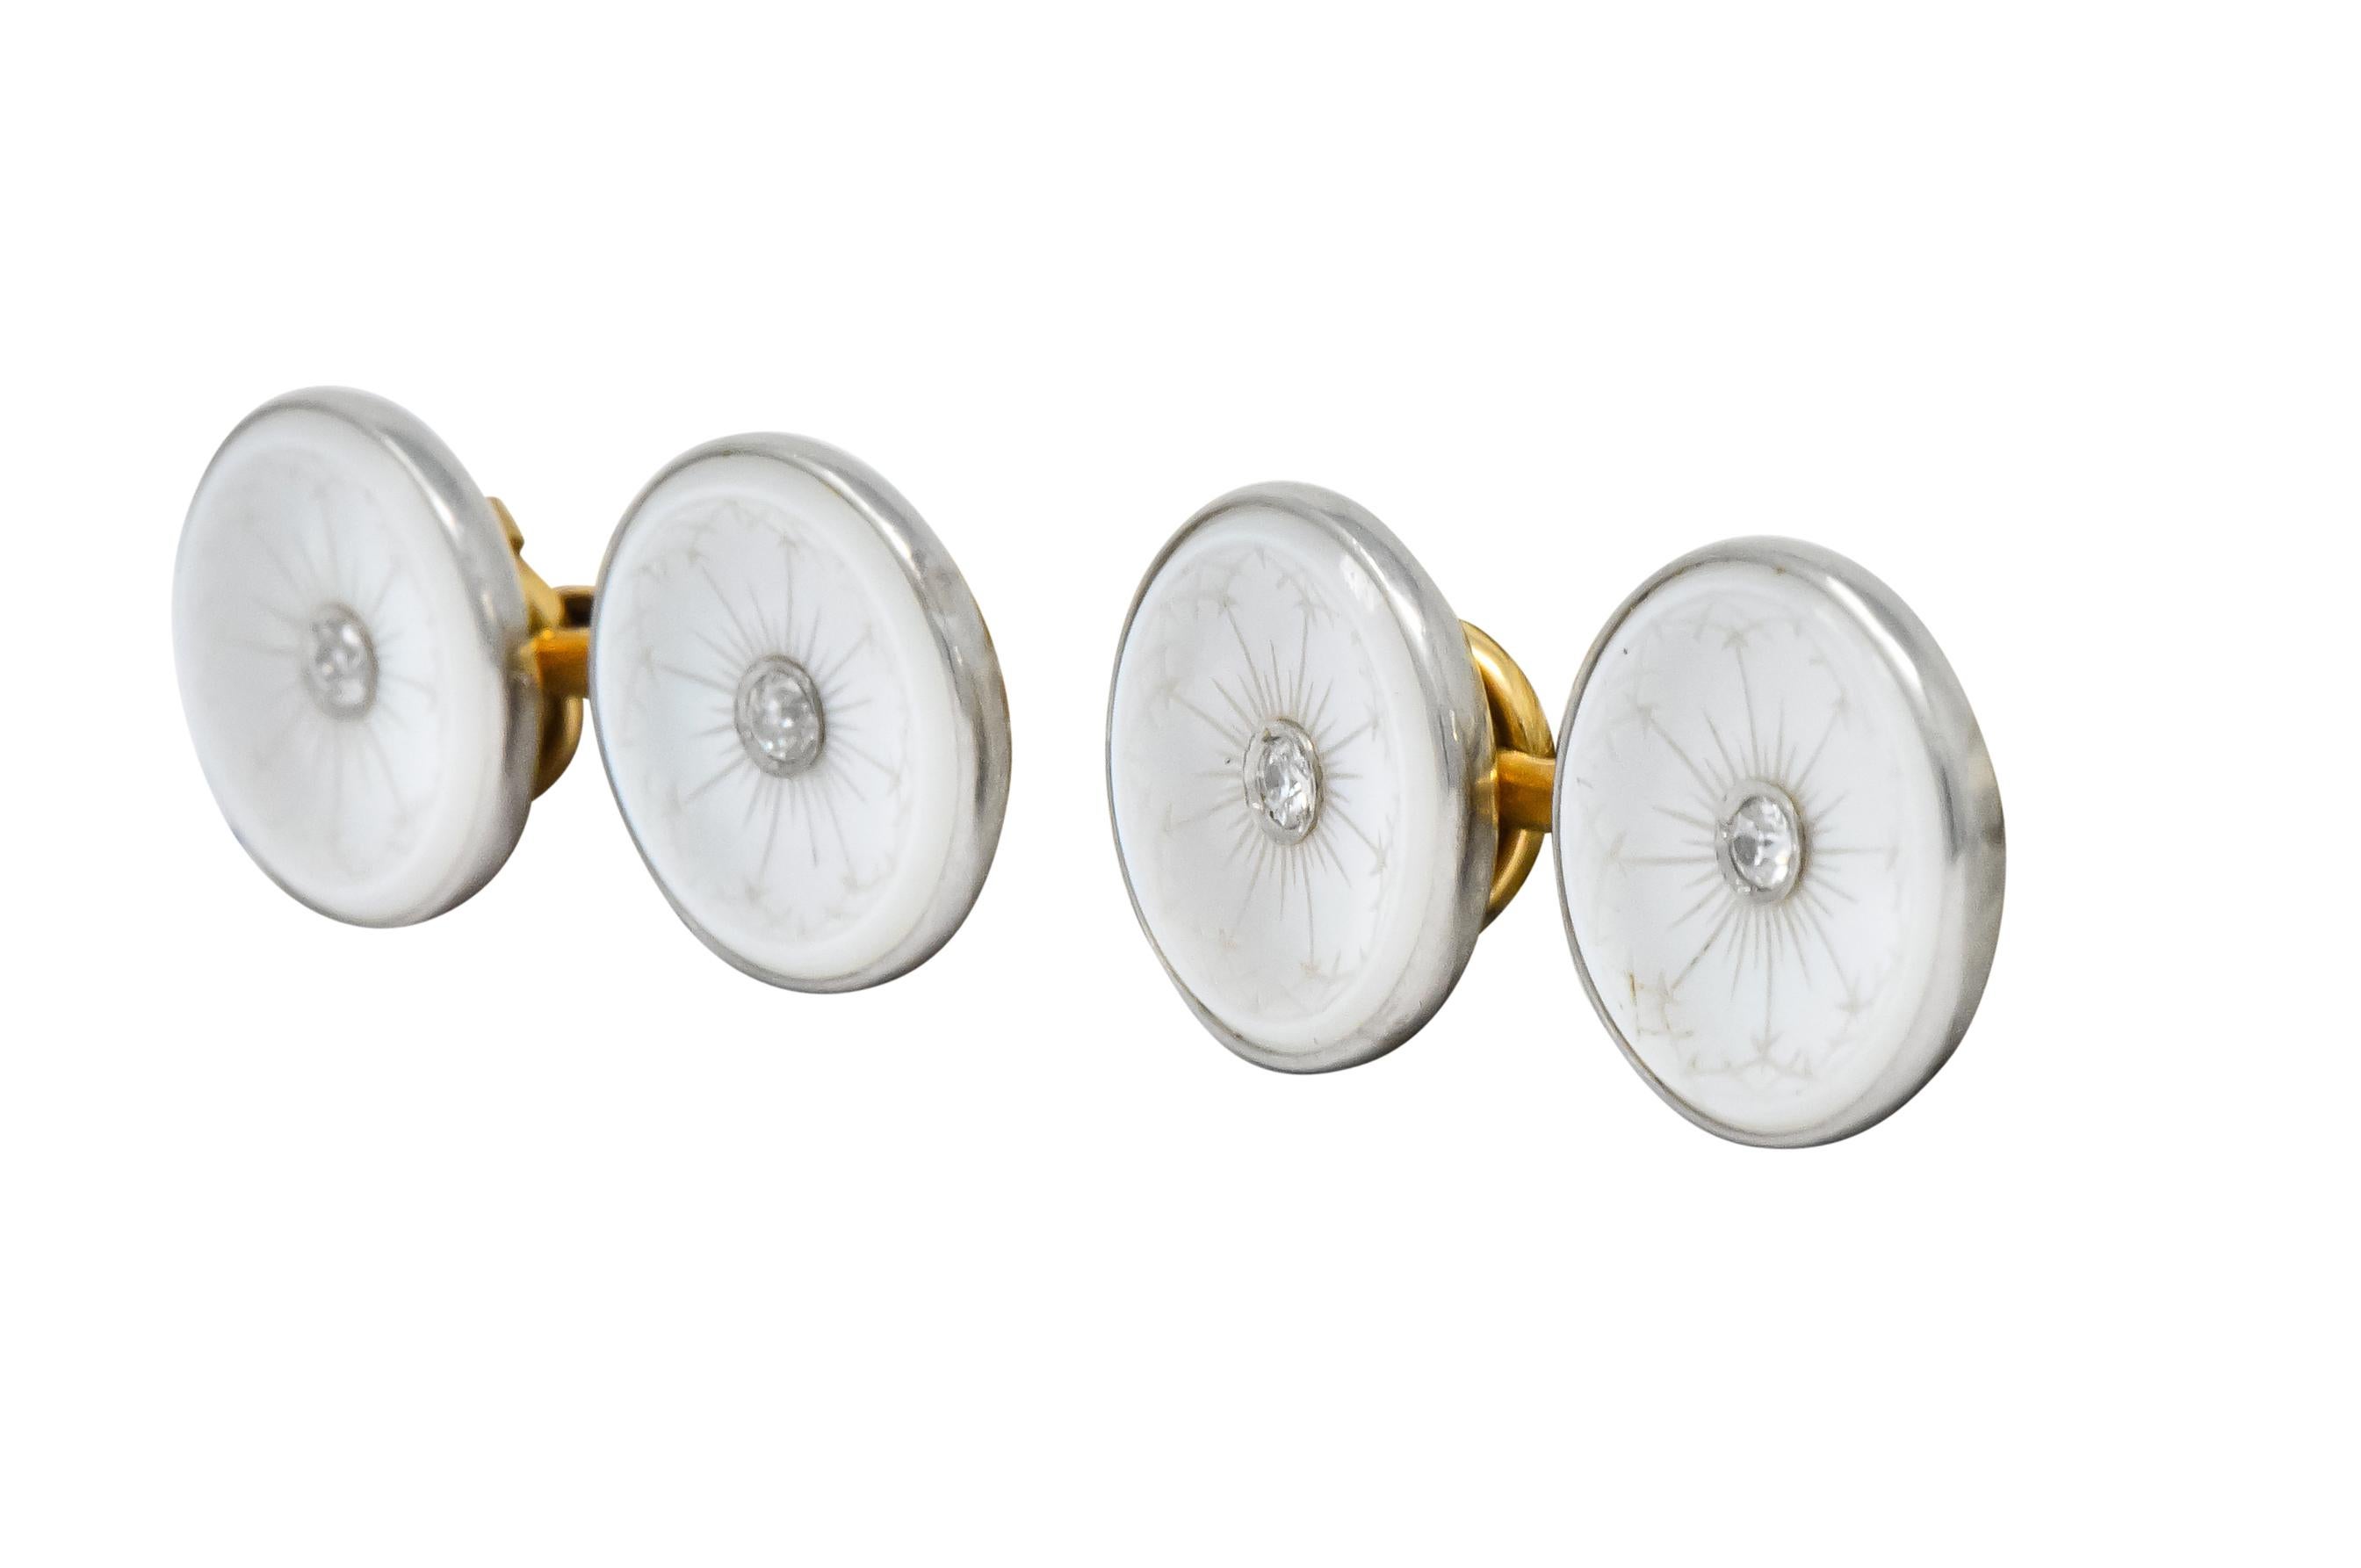 Link style cufflinks, bezel set on both ends, with circular white mother of pearl measuring 1/2 x 1/2 inch

Each mother of pearl disk is engraved with a linear design while centering a round brilliant cut diamond, eye-clean and white

With maker's